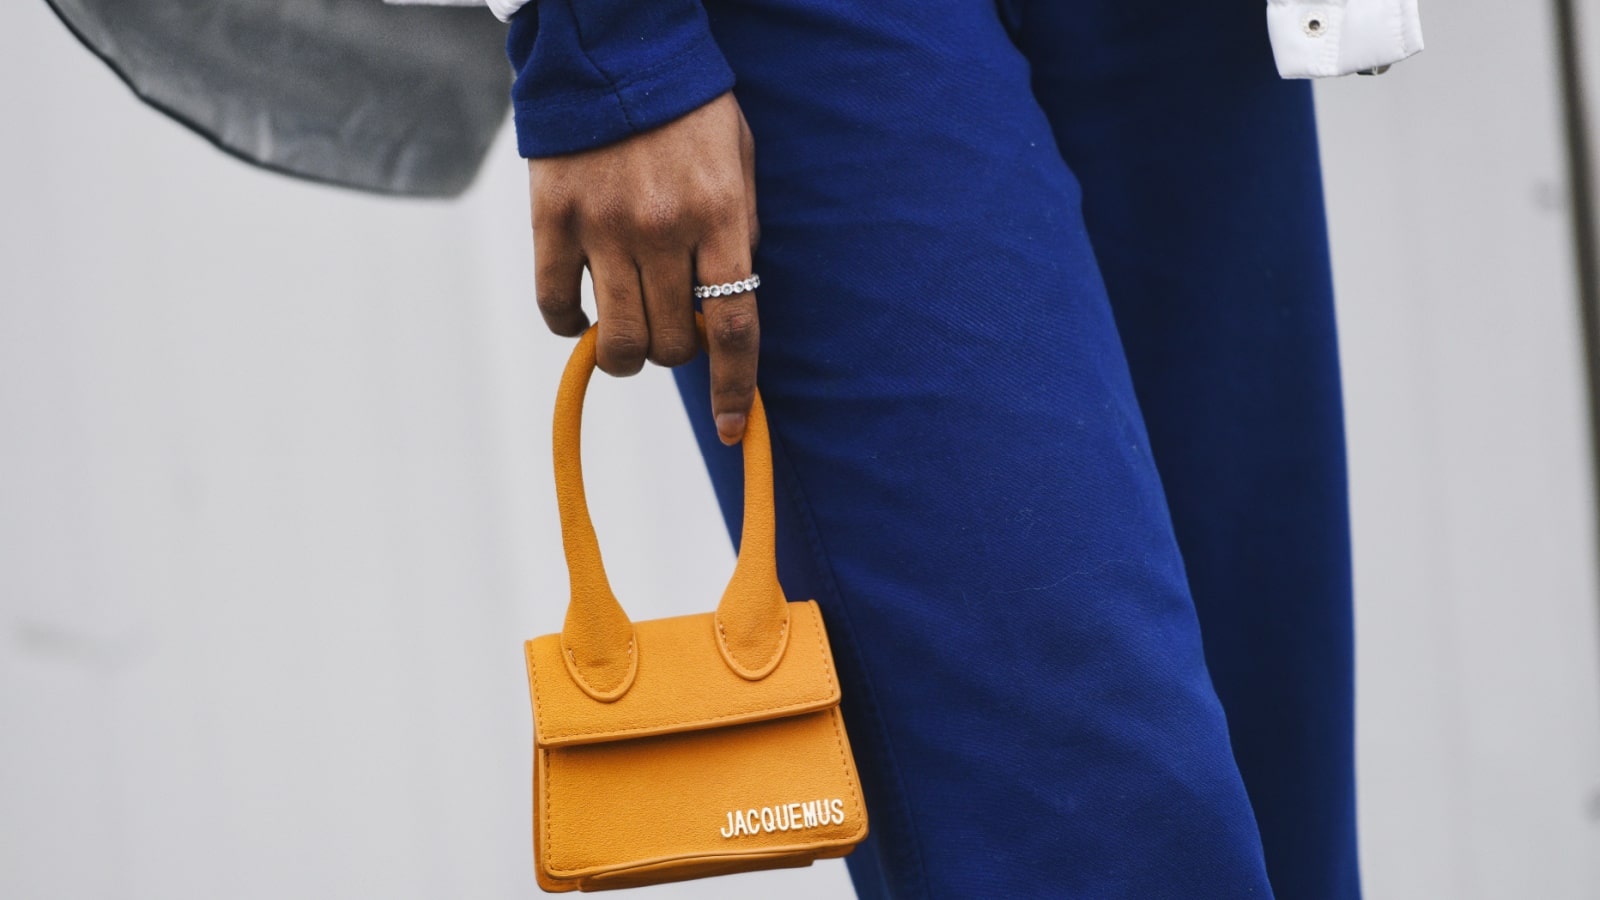 Paris, France - March 03, 2019: Street style outfit - Purse in detail after a fashion show during Paris Fashion Week - PFWFW19